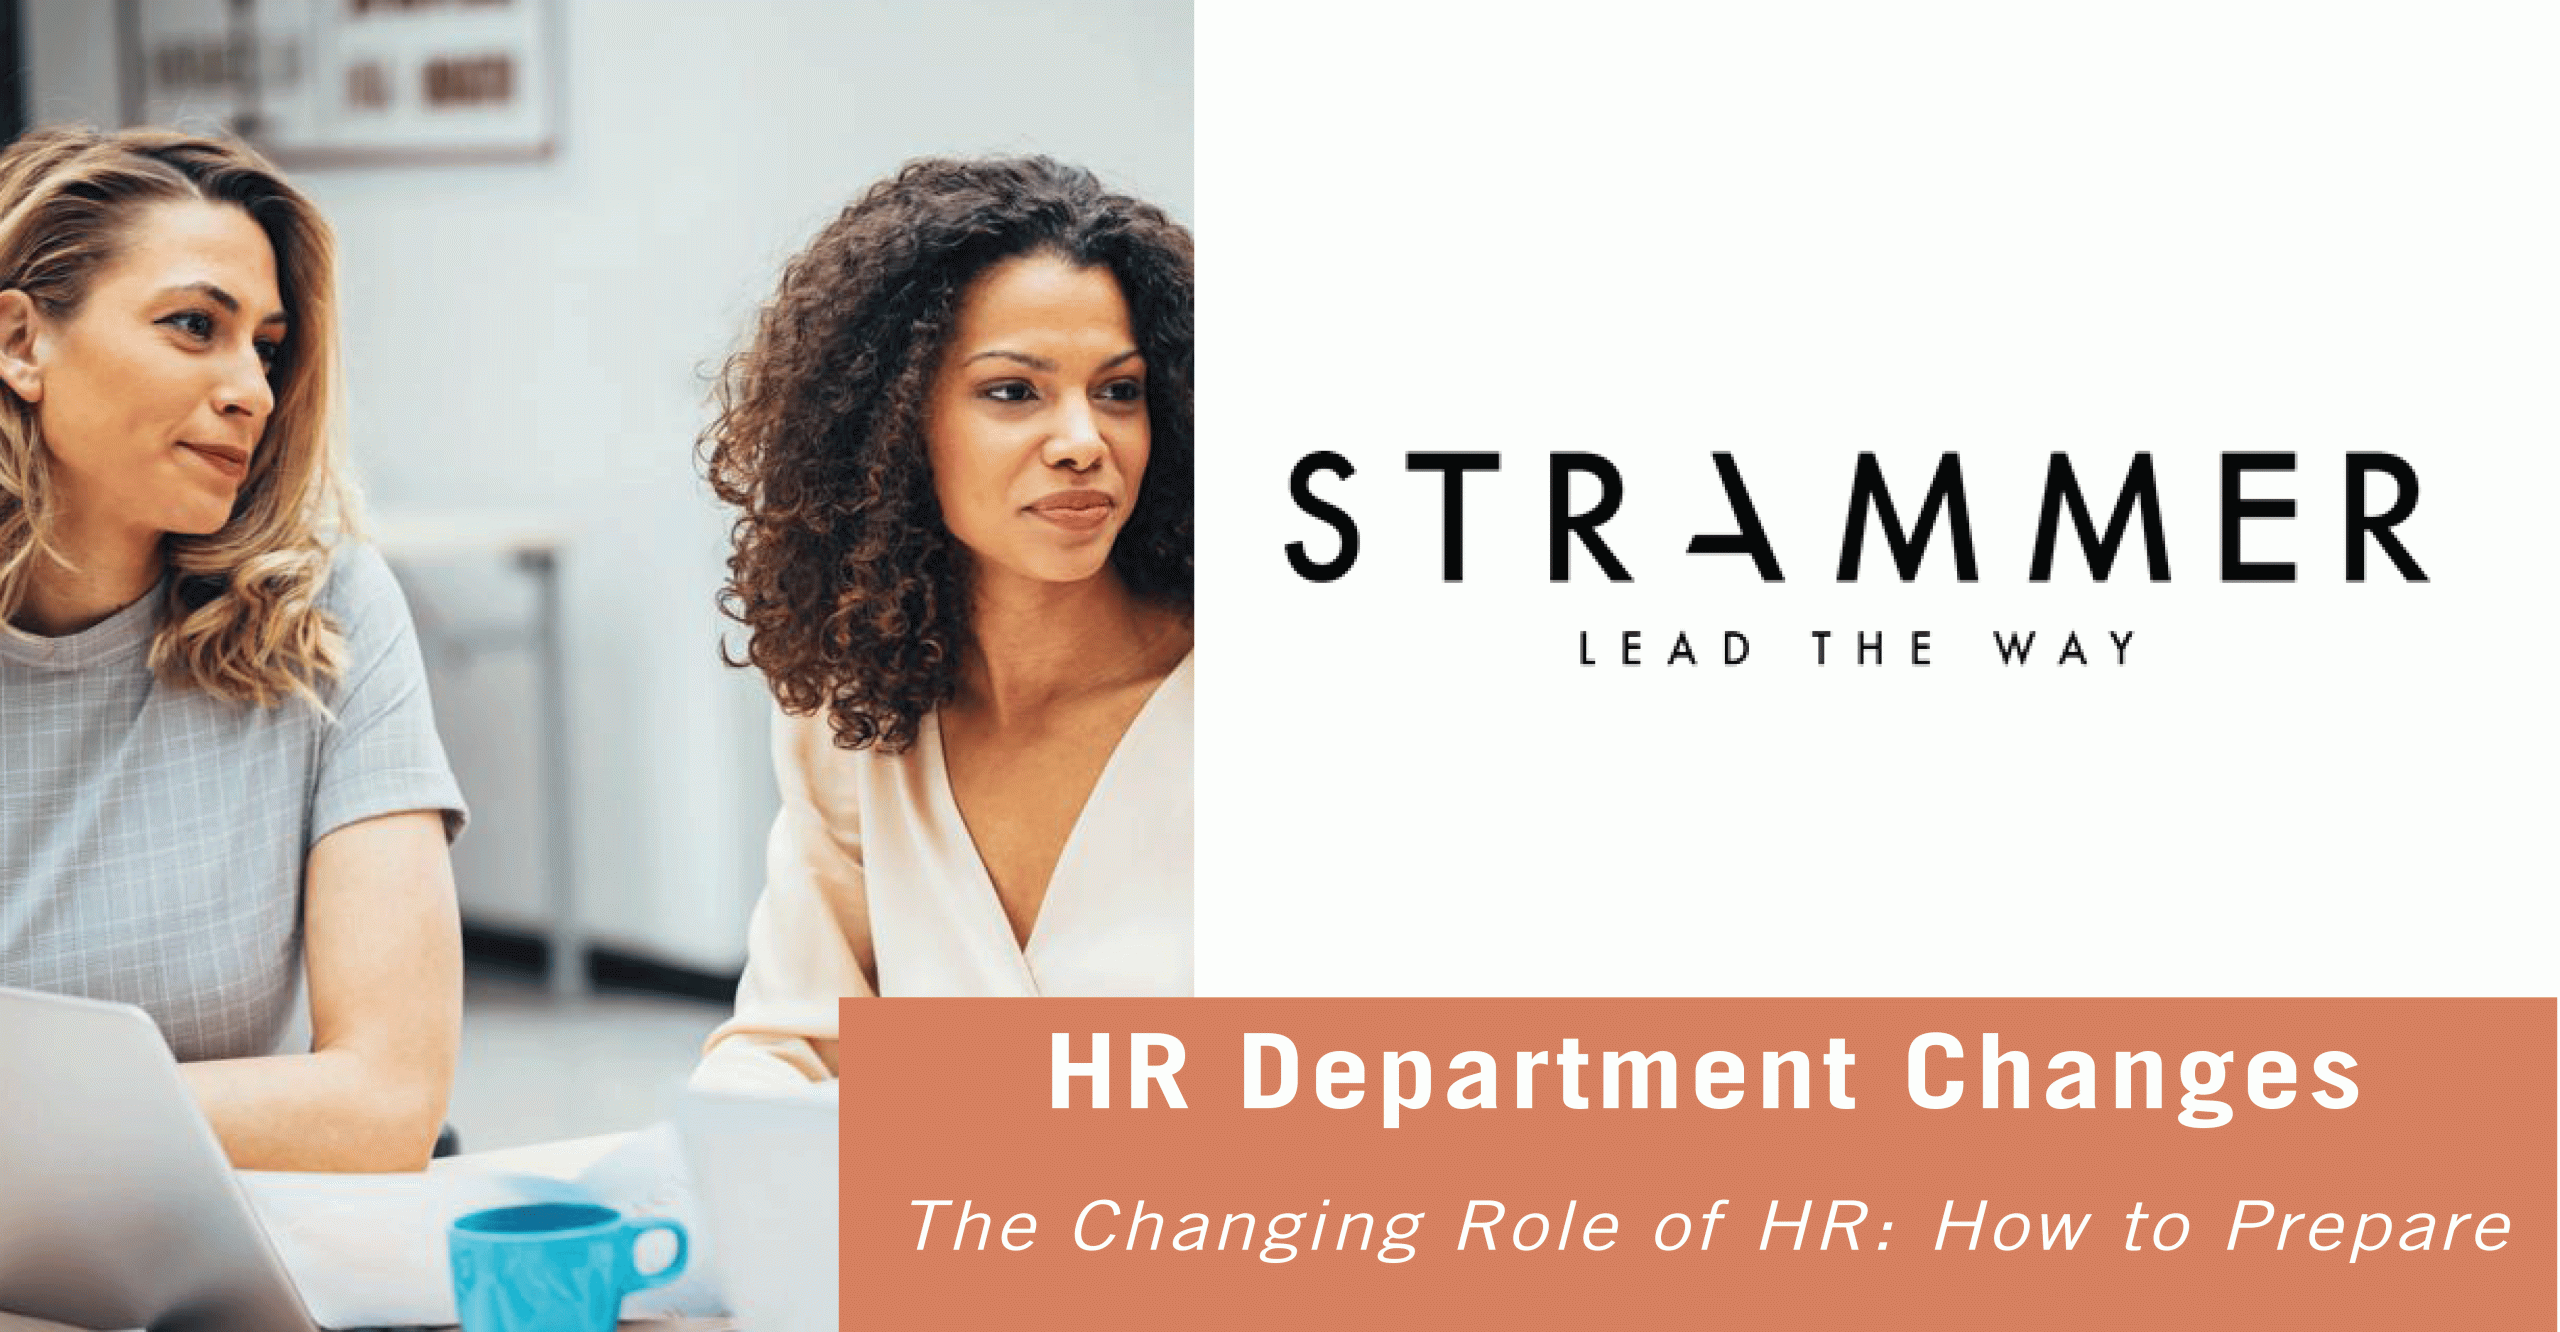 The Changing Role of HR: How to Prepare